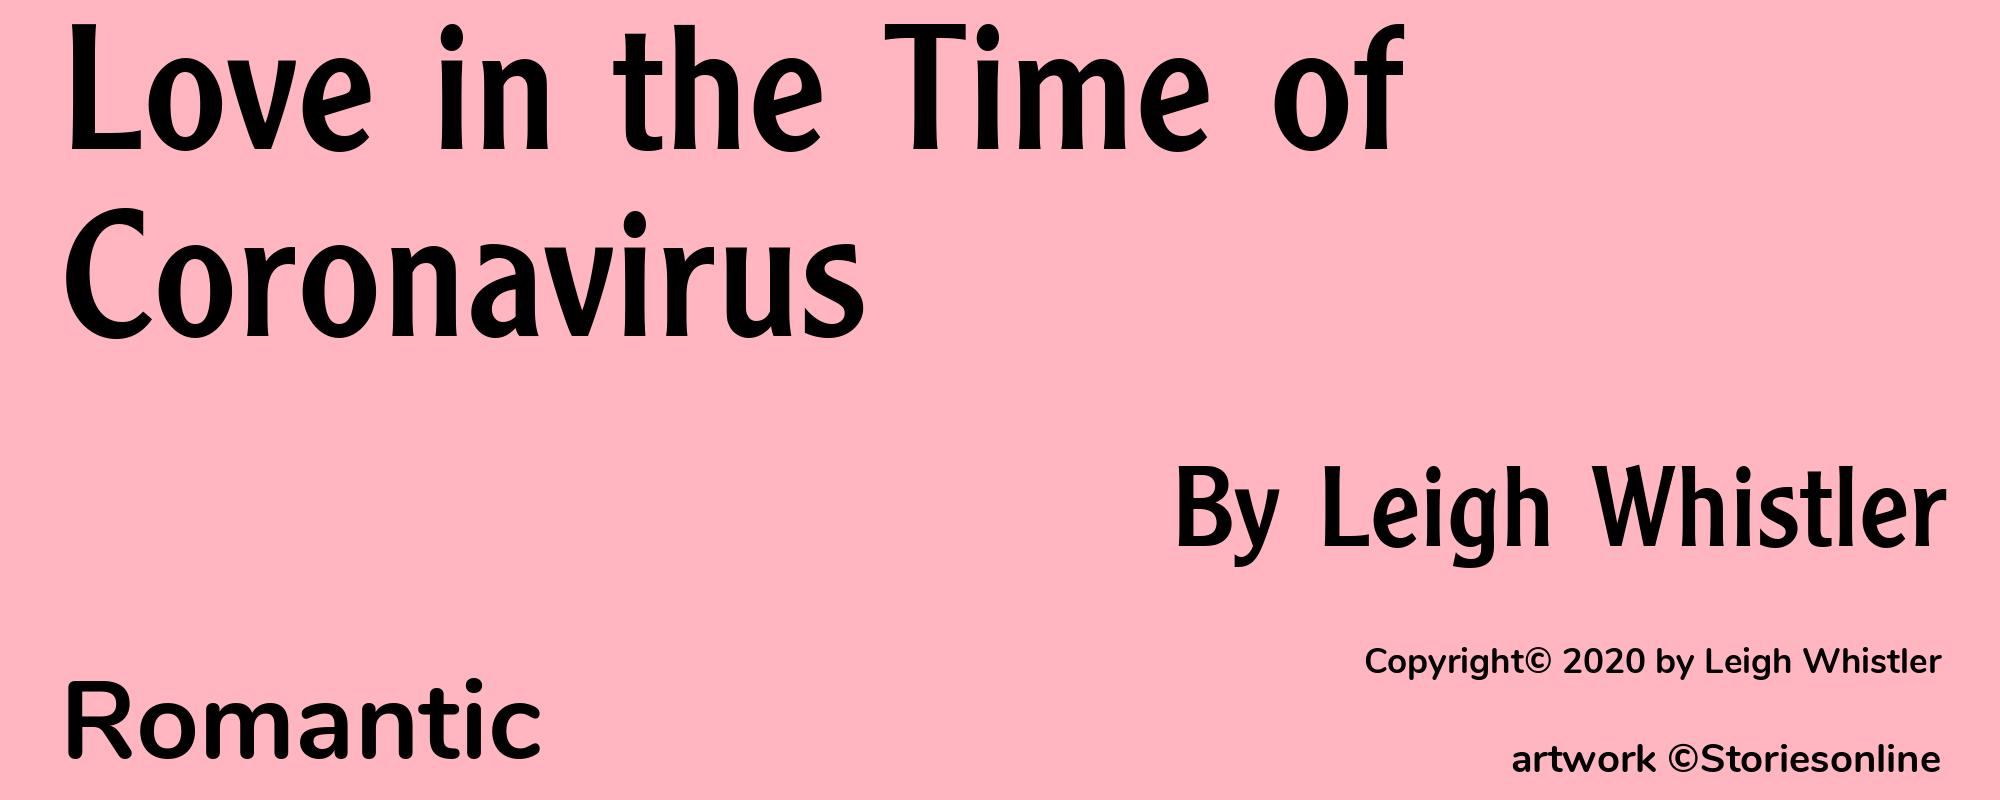 Love in the Time of Coronavirus - Cover